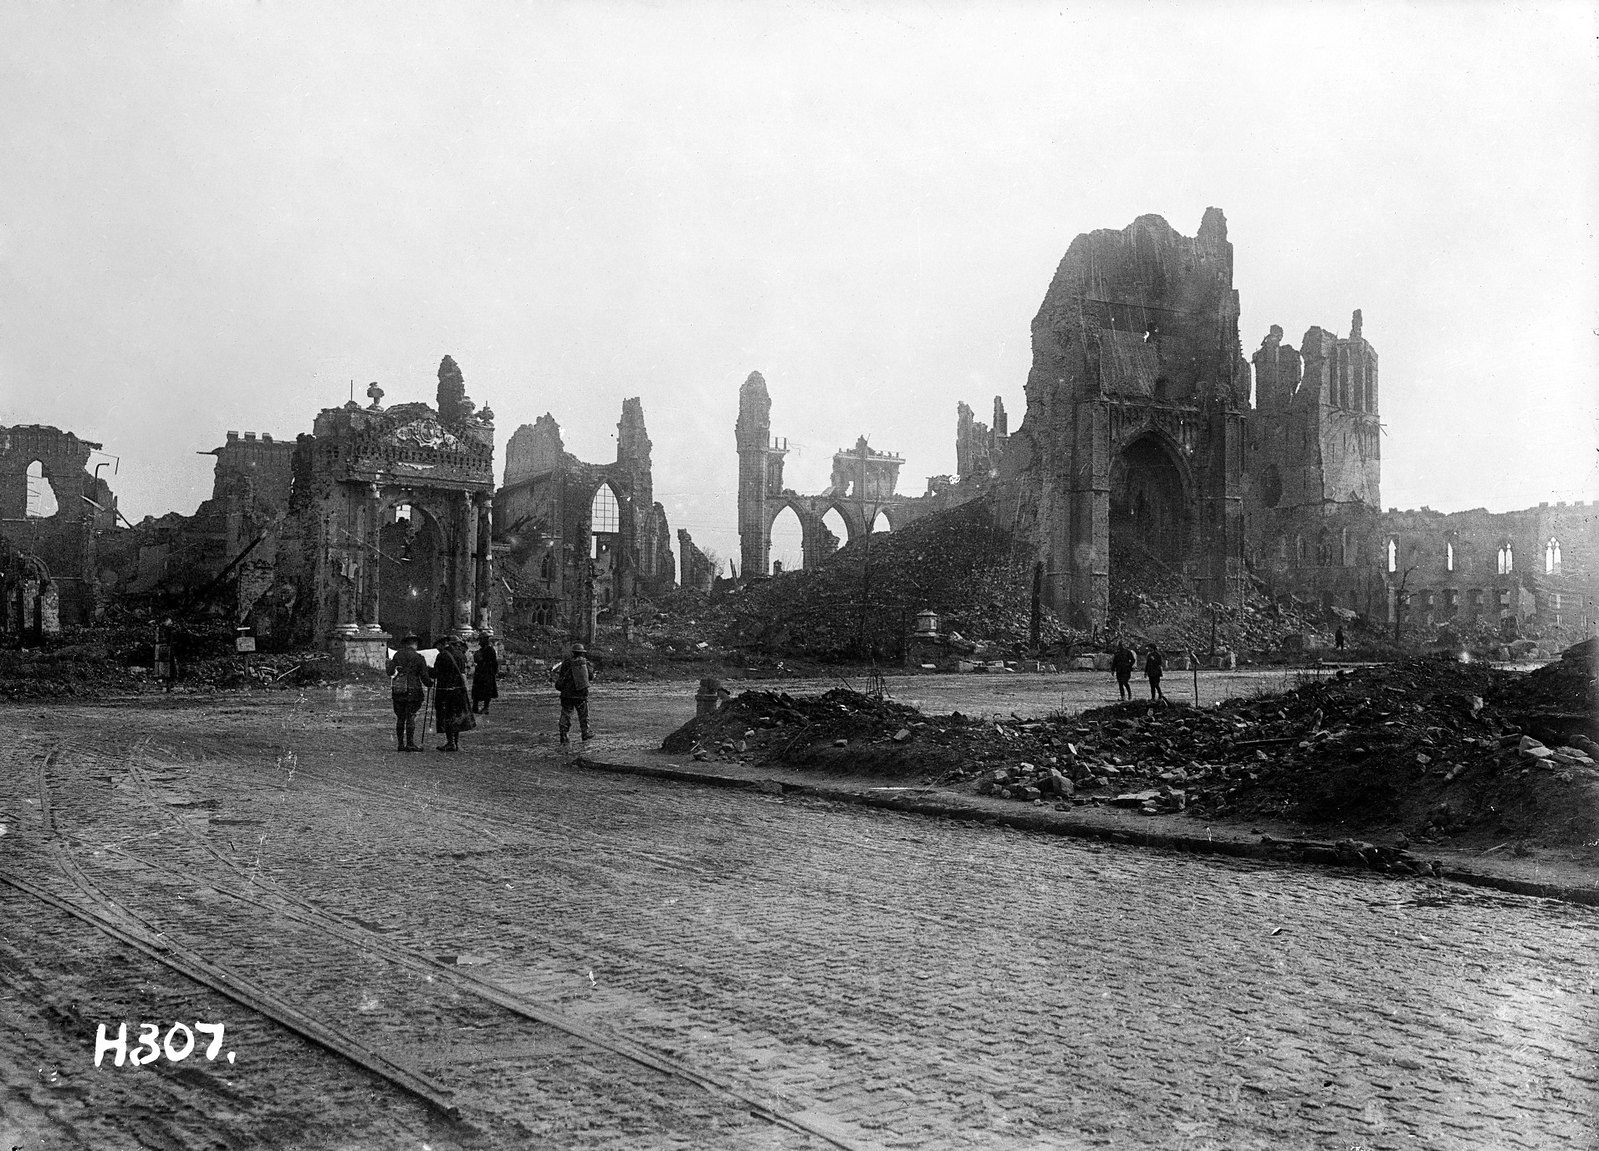 The ruins of Ypres, Belgium